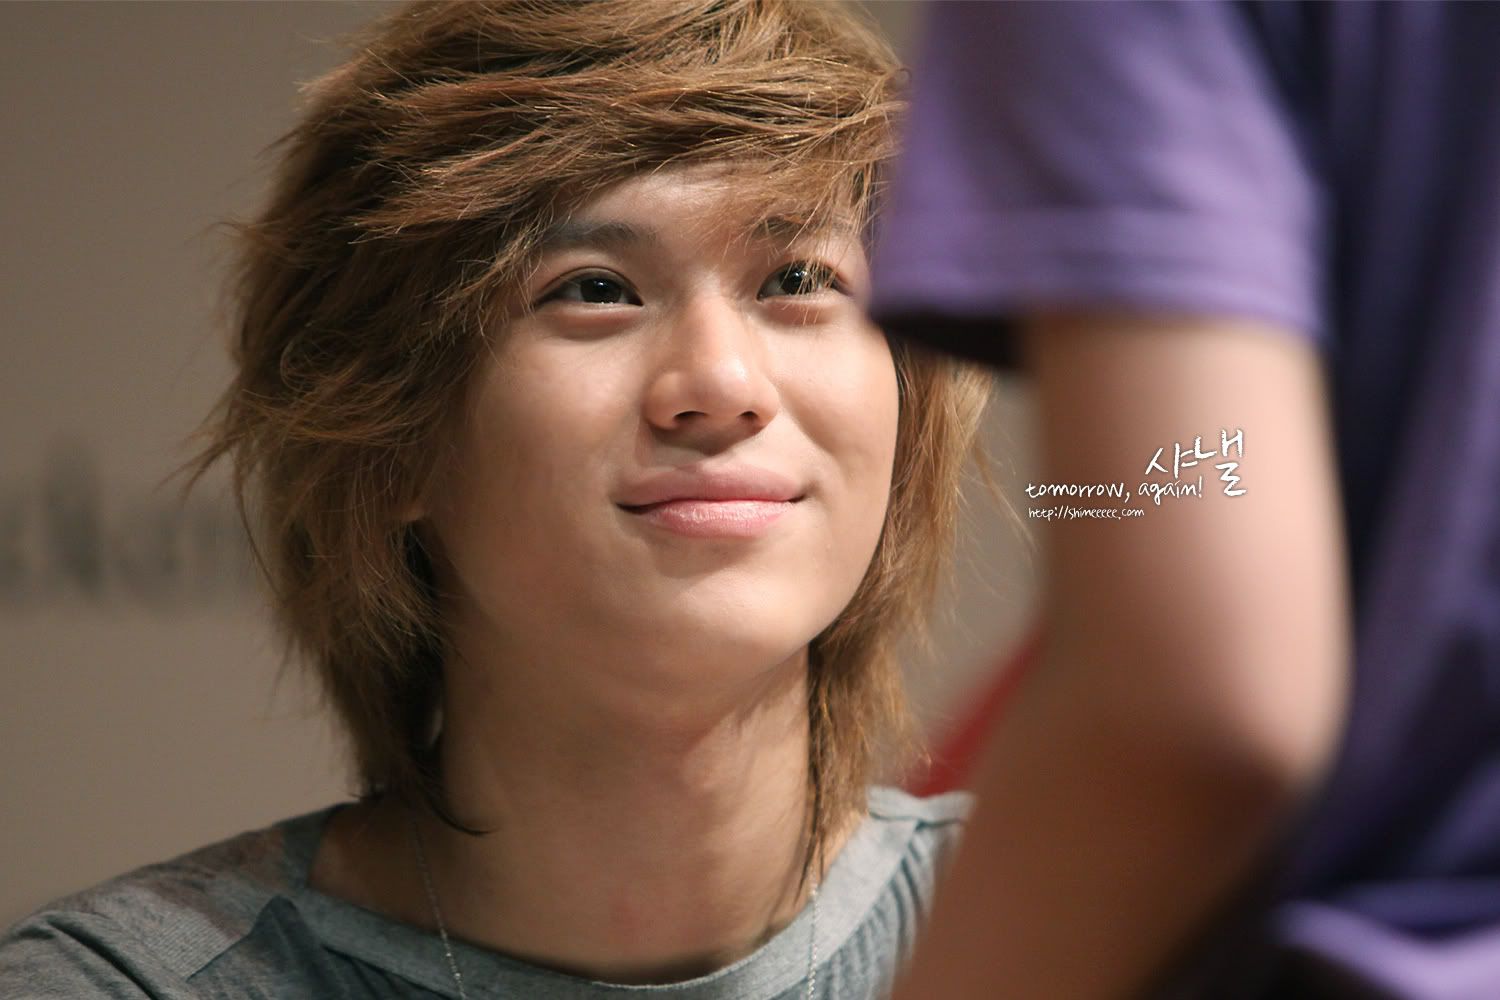 [Pic][12-8-2010] Taemin at Mexicana Fansigning F0081930_4c63deface60c